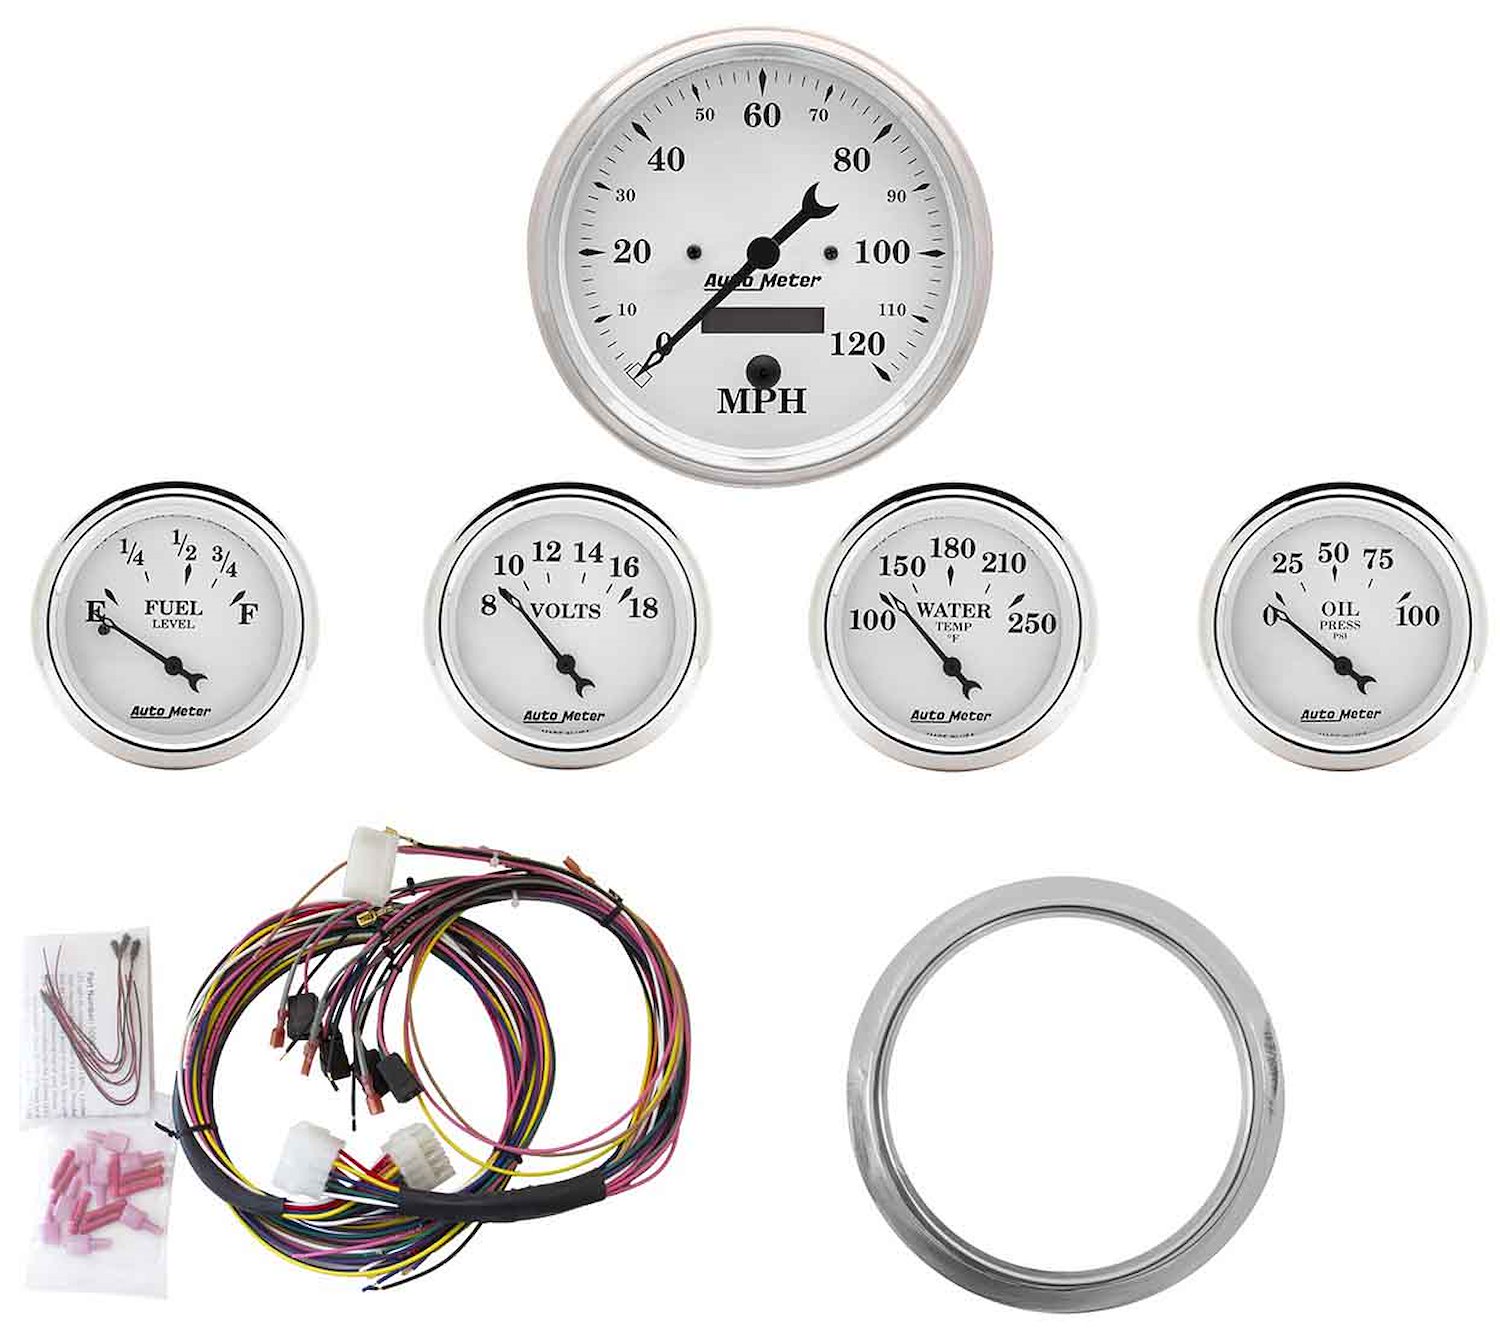 5-Gauge Direct-Fit Dash Kit 1959-1960 Chevy Car - Old Tyme White Series